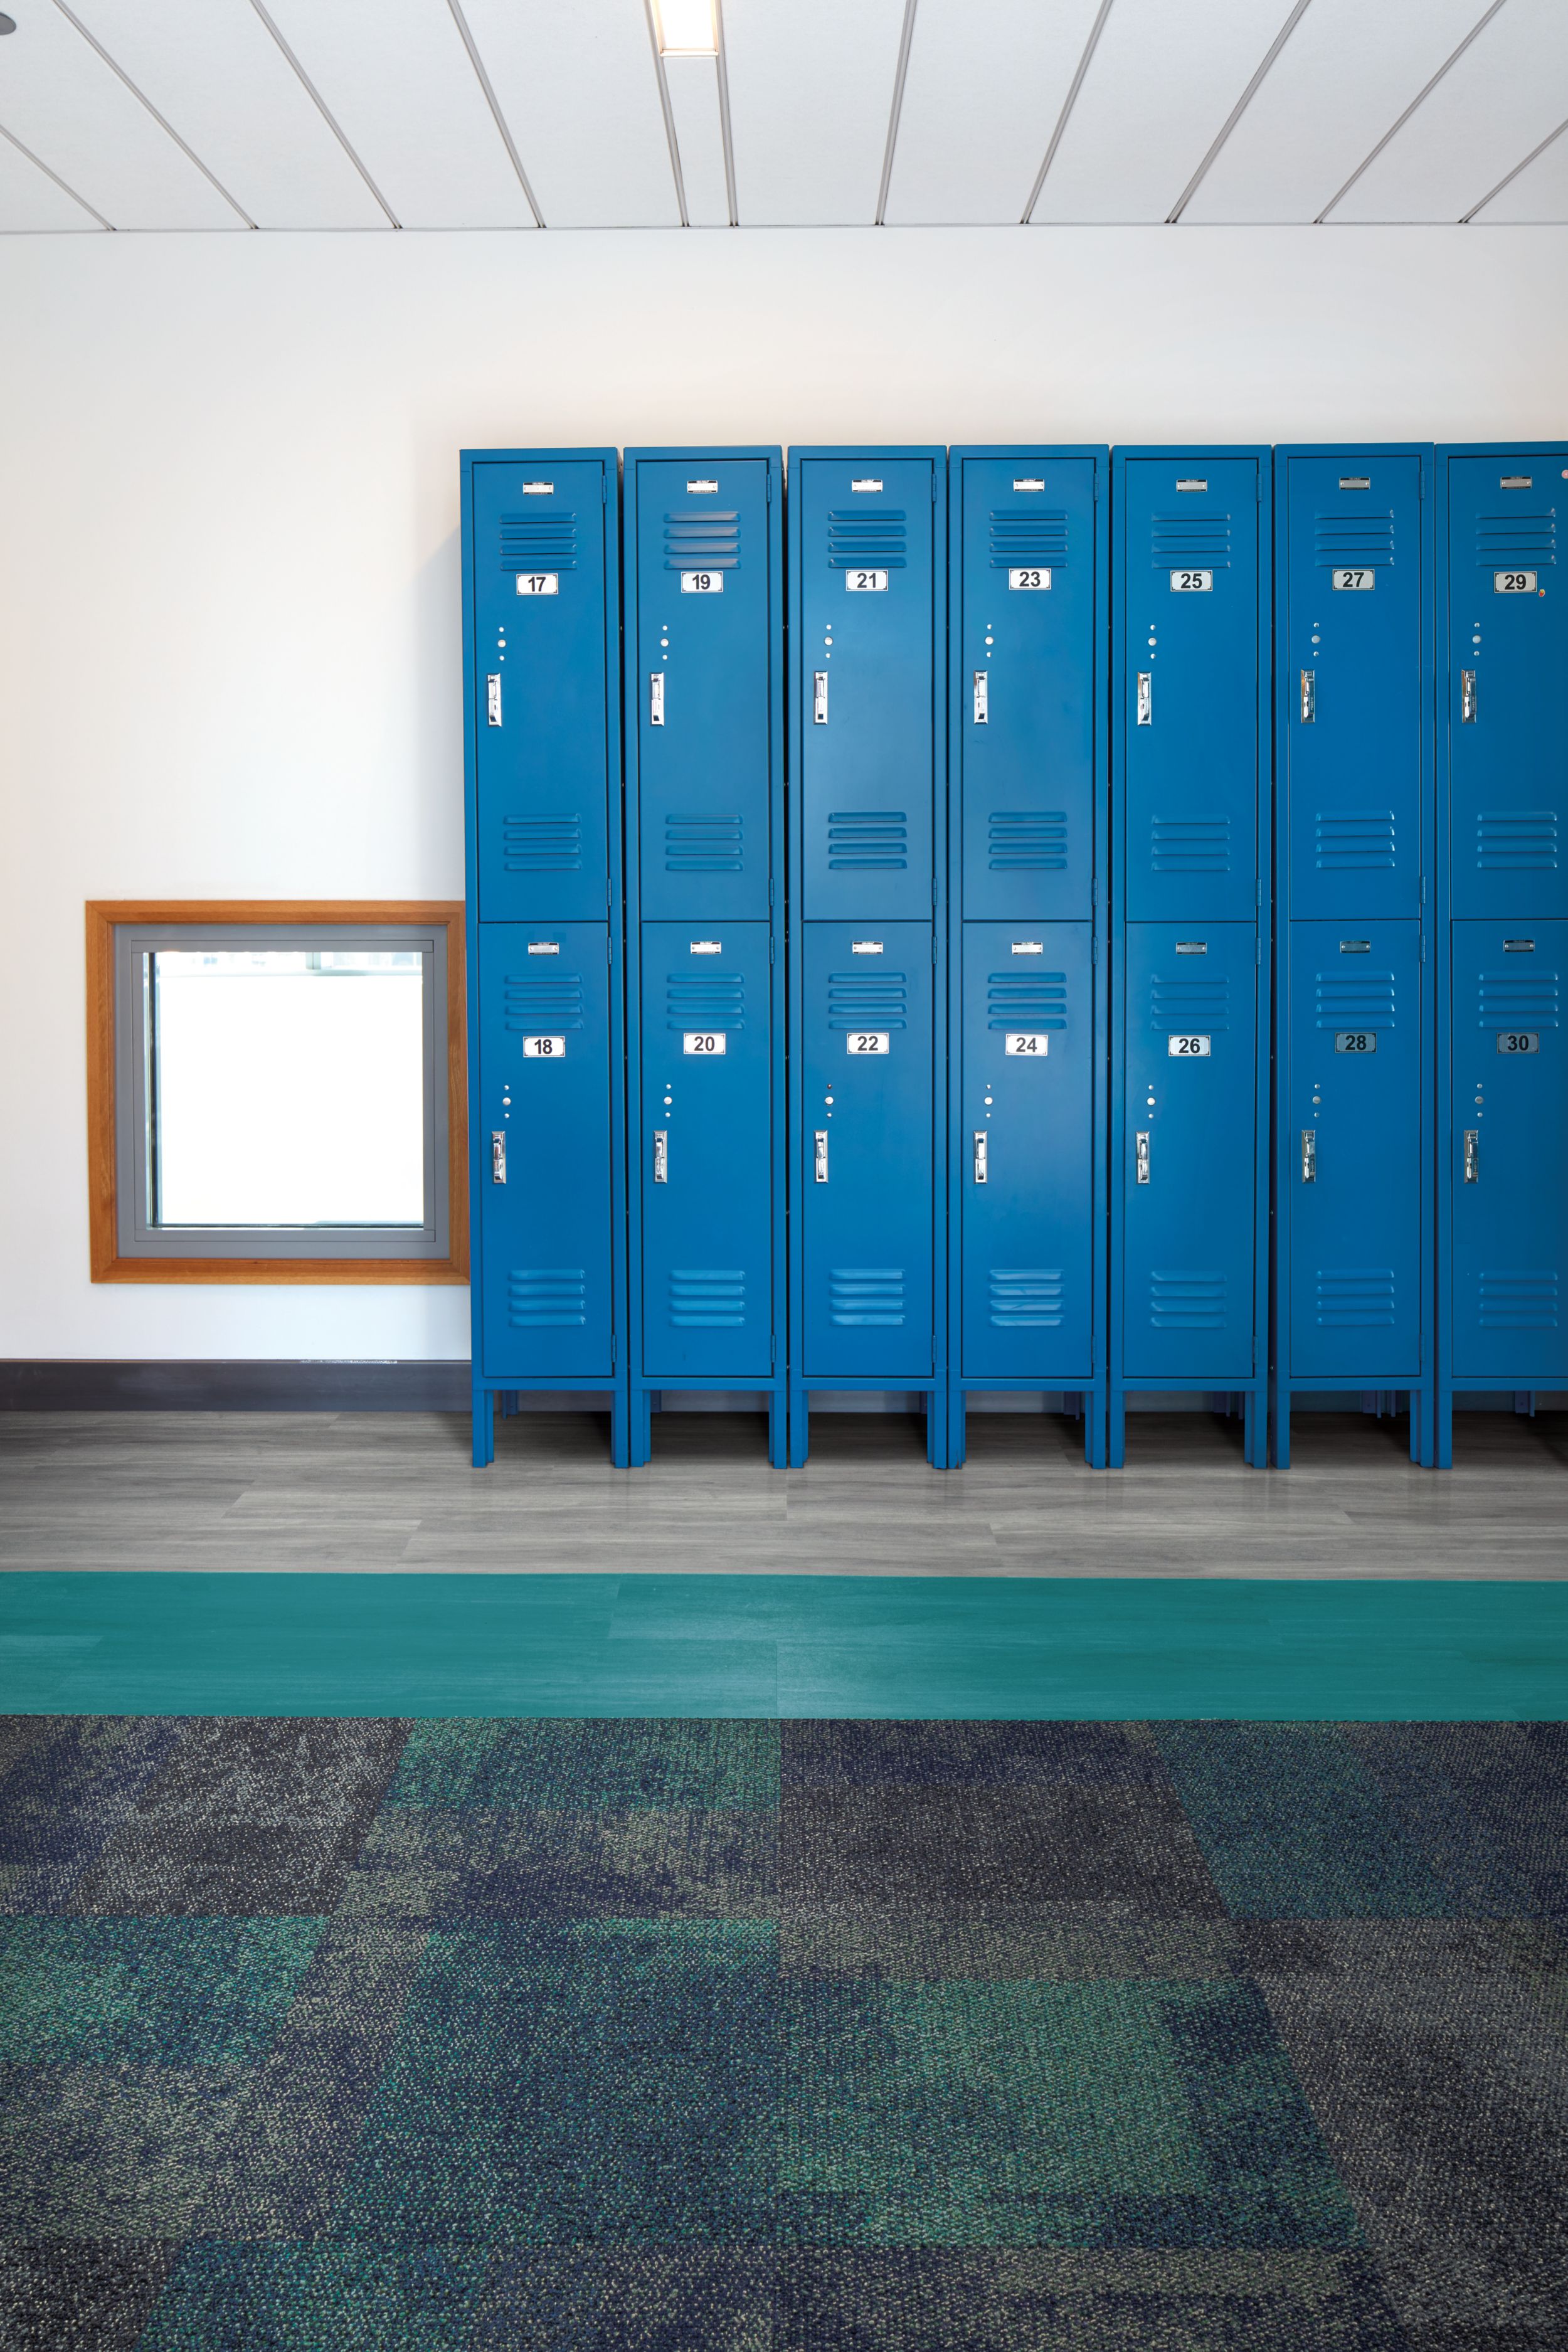 Interface Exposed carpet tile and Studio Set LVT in hallway with blue lockers numéro d’image 11